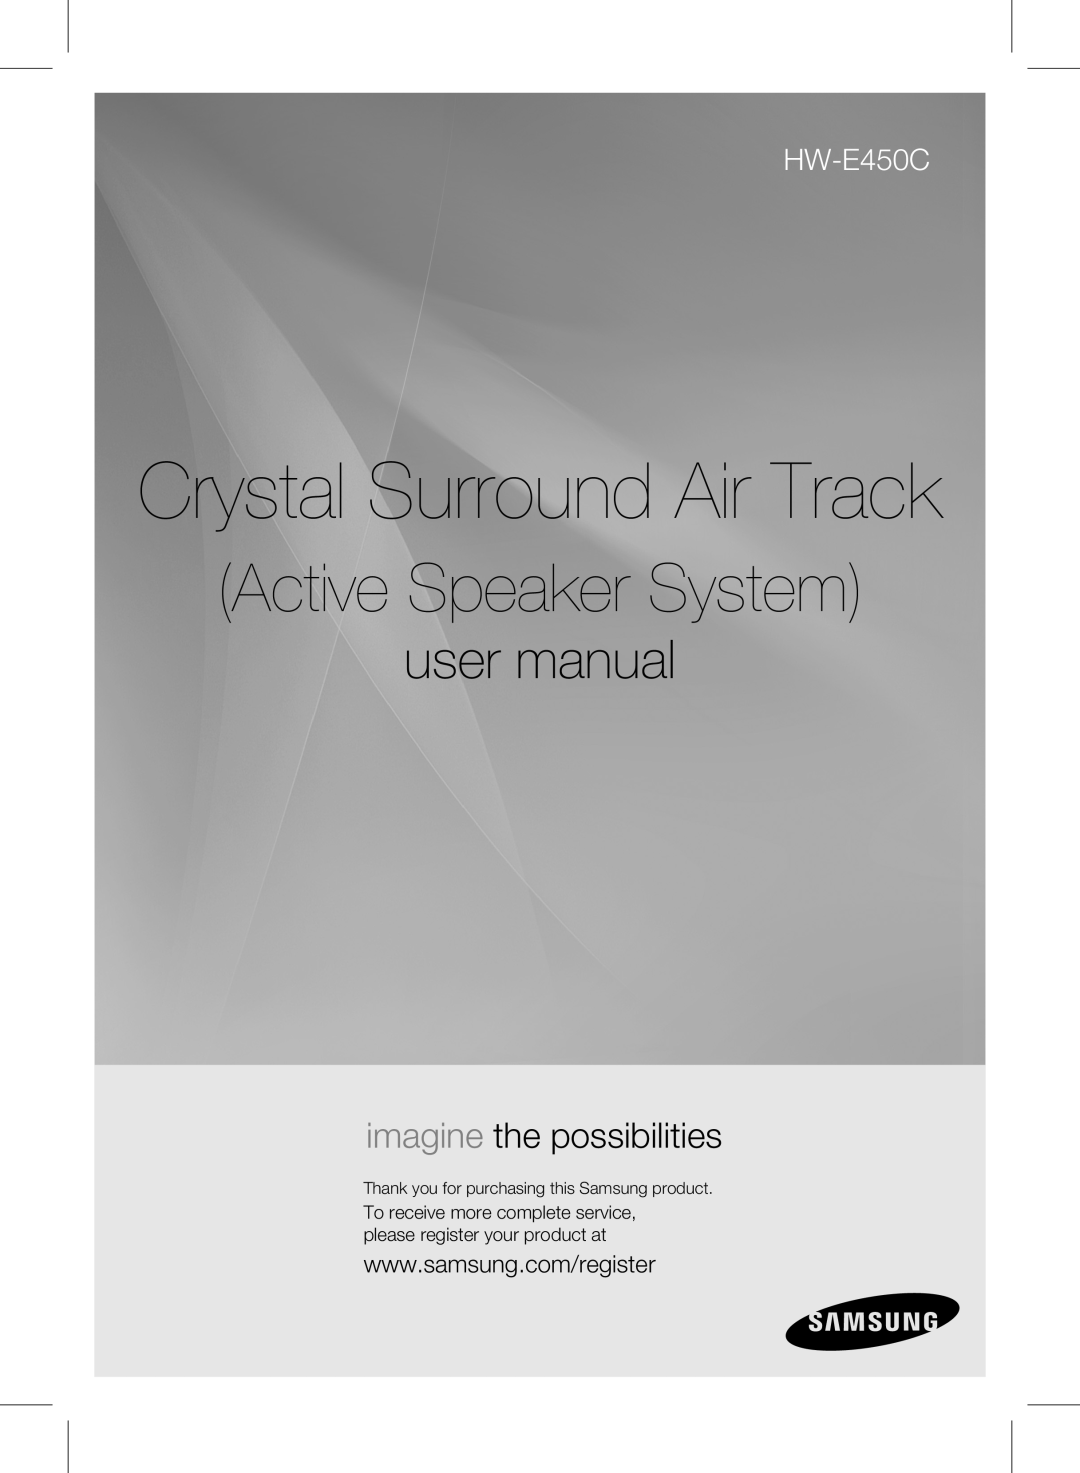 Samsung HW-E450C user manual Crystal Surround Air Track, Active Speaker System, imagine the possibilities 